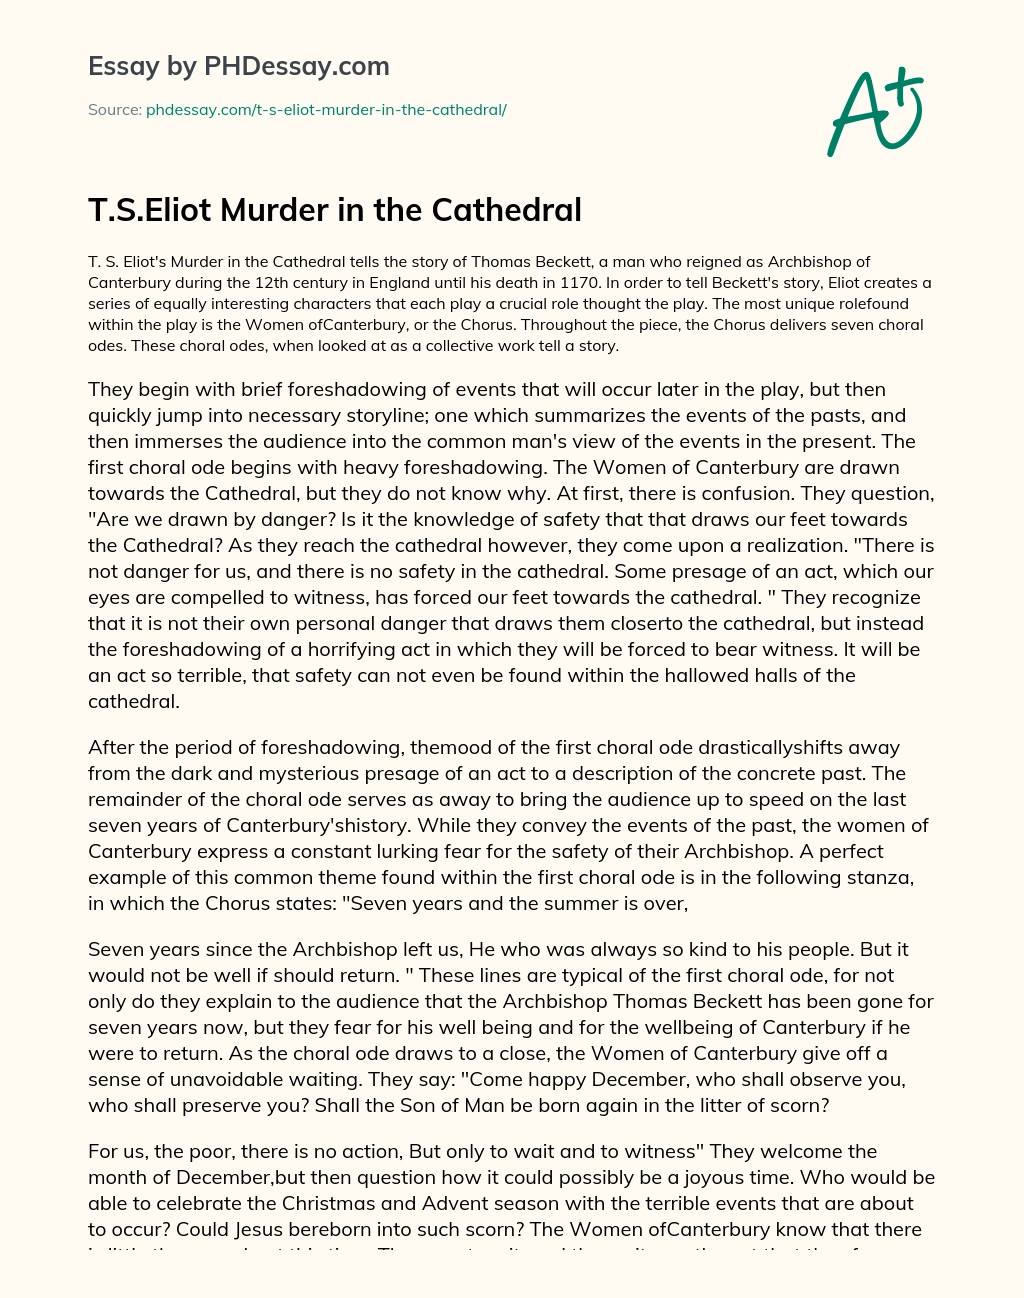 T.S.Eliot Murder in the Cathedral essay